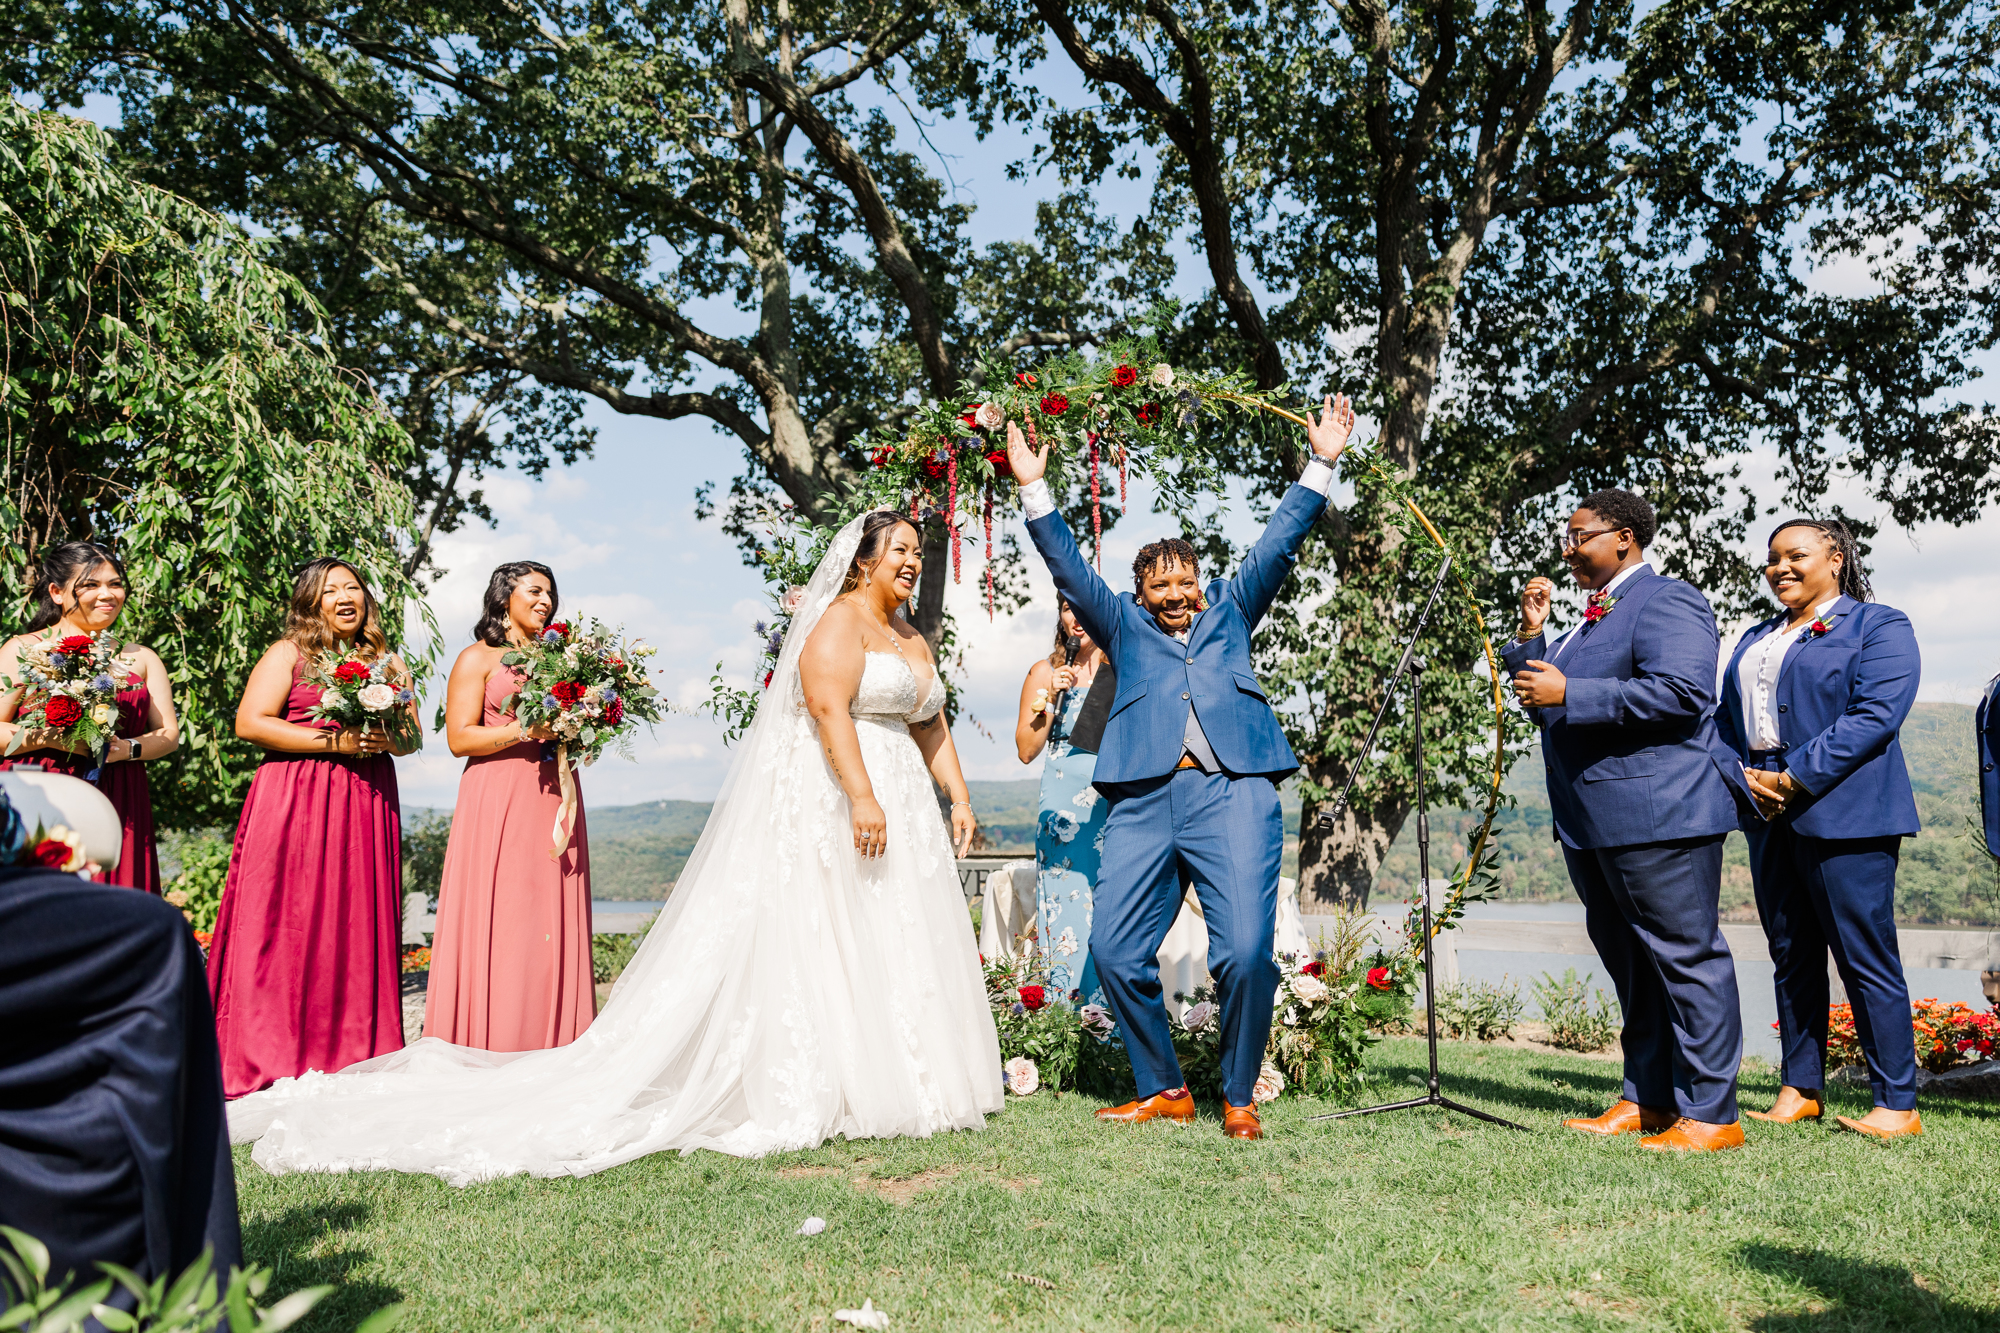 Playful Thayer Hotel Wedding in the Summertime